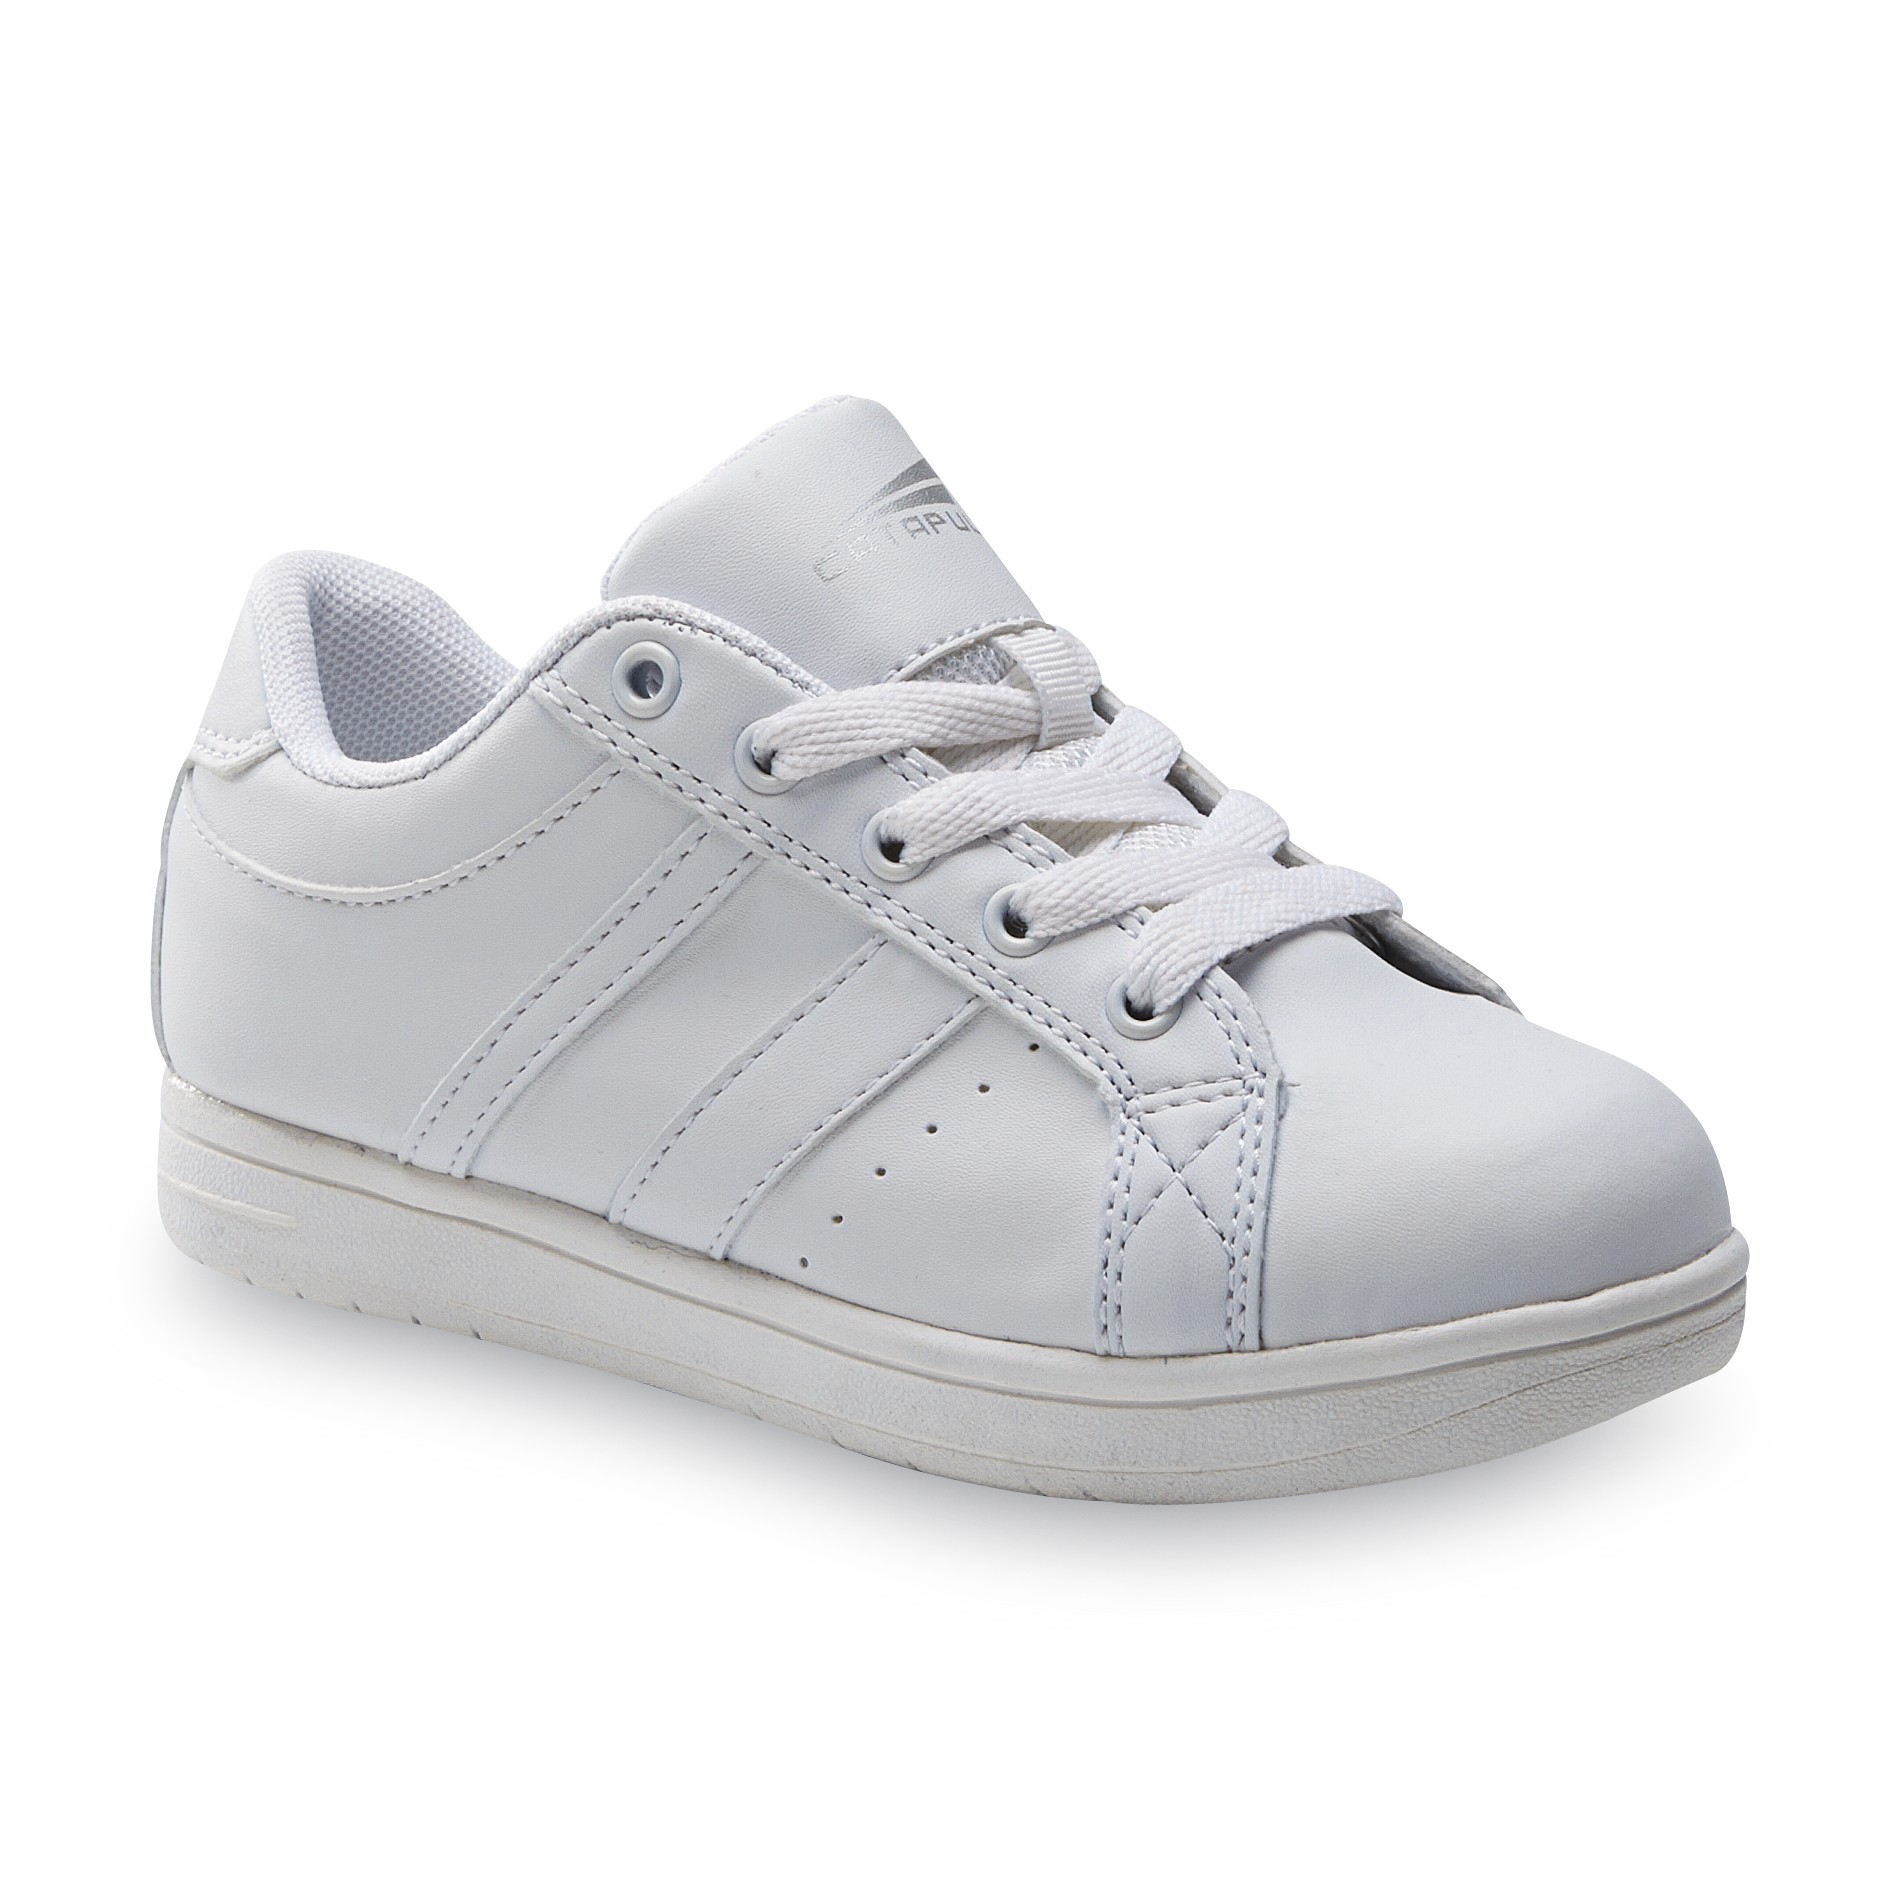 CATAPULT Boy's Contact Athletic Shoe - White